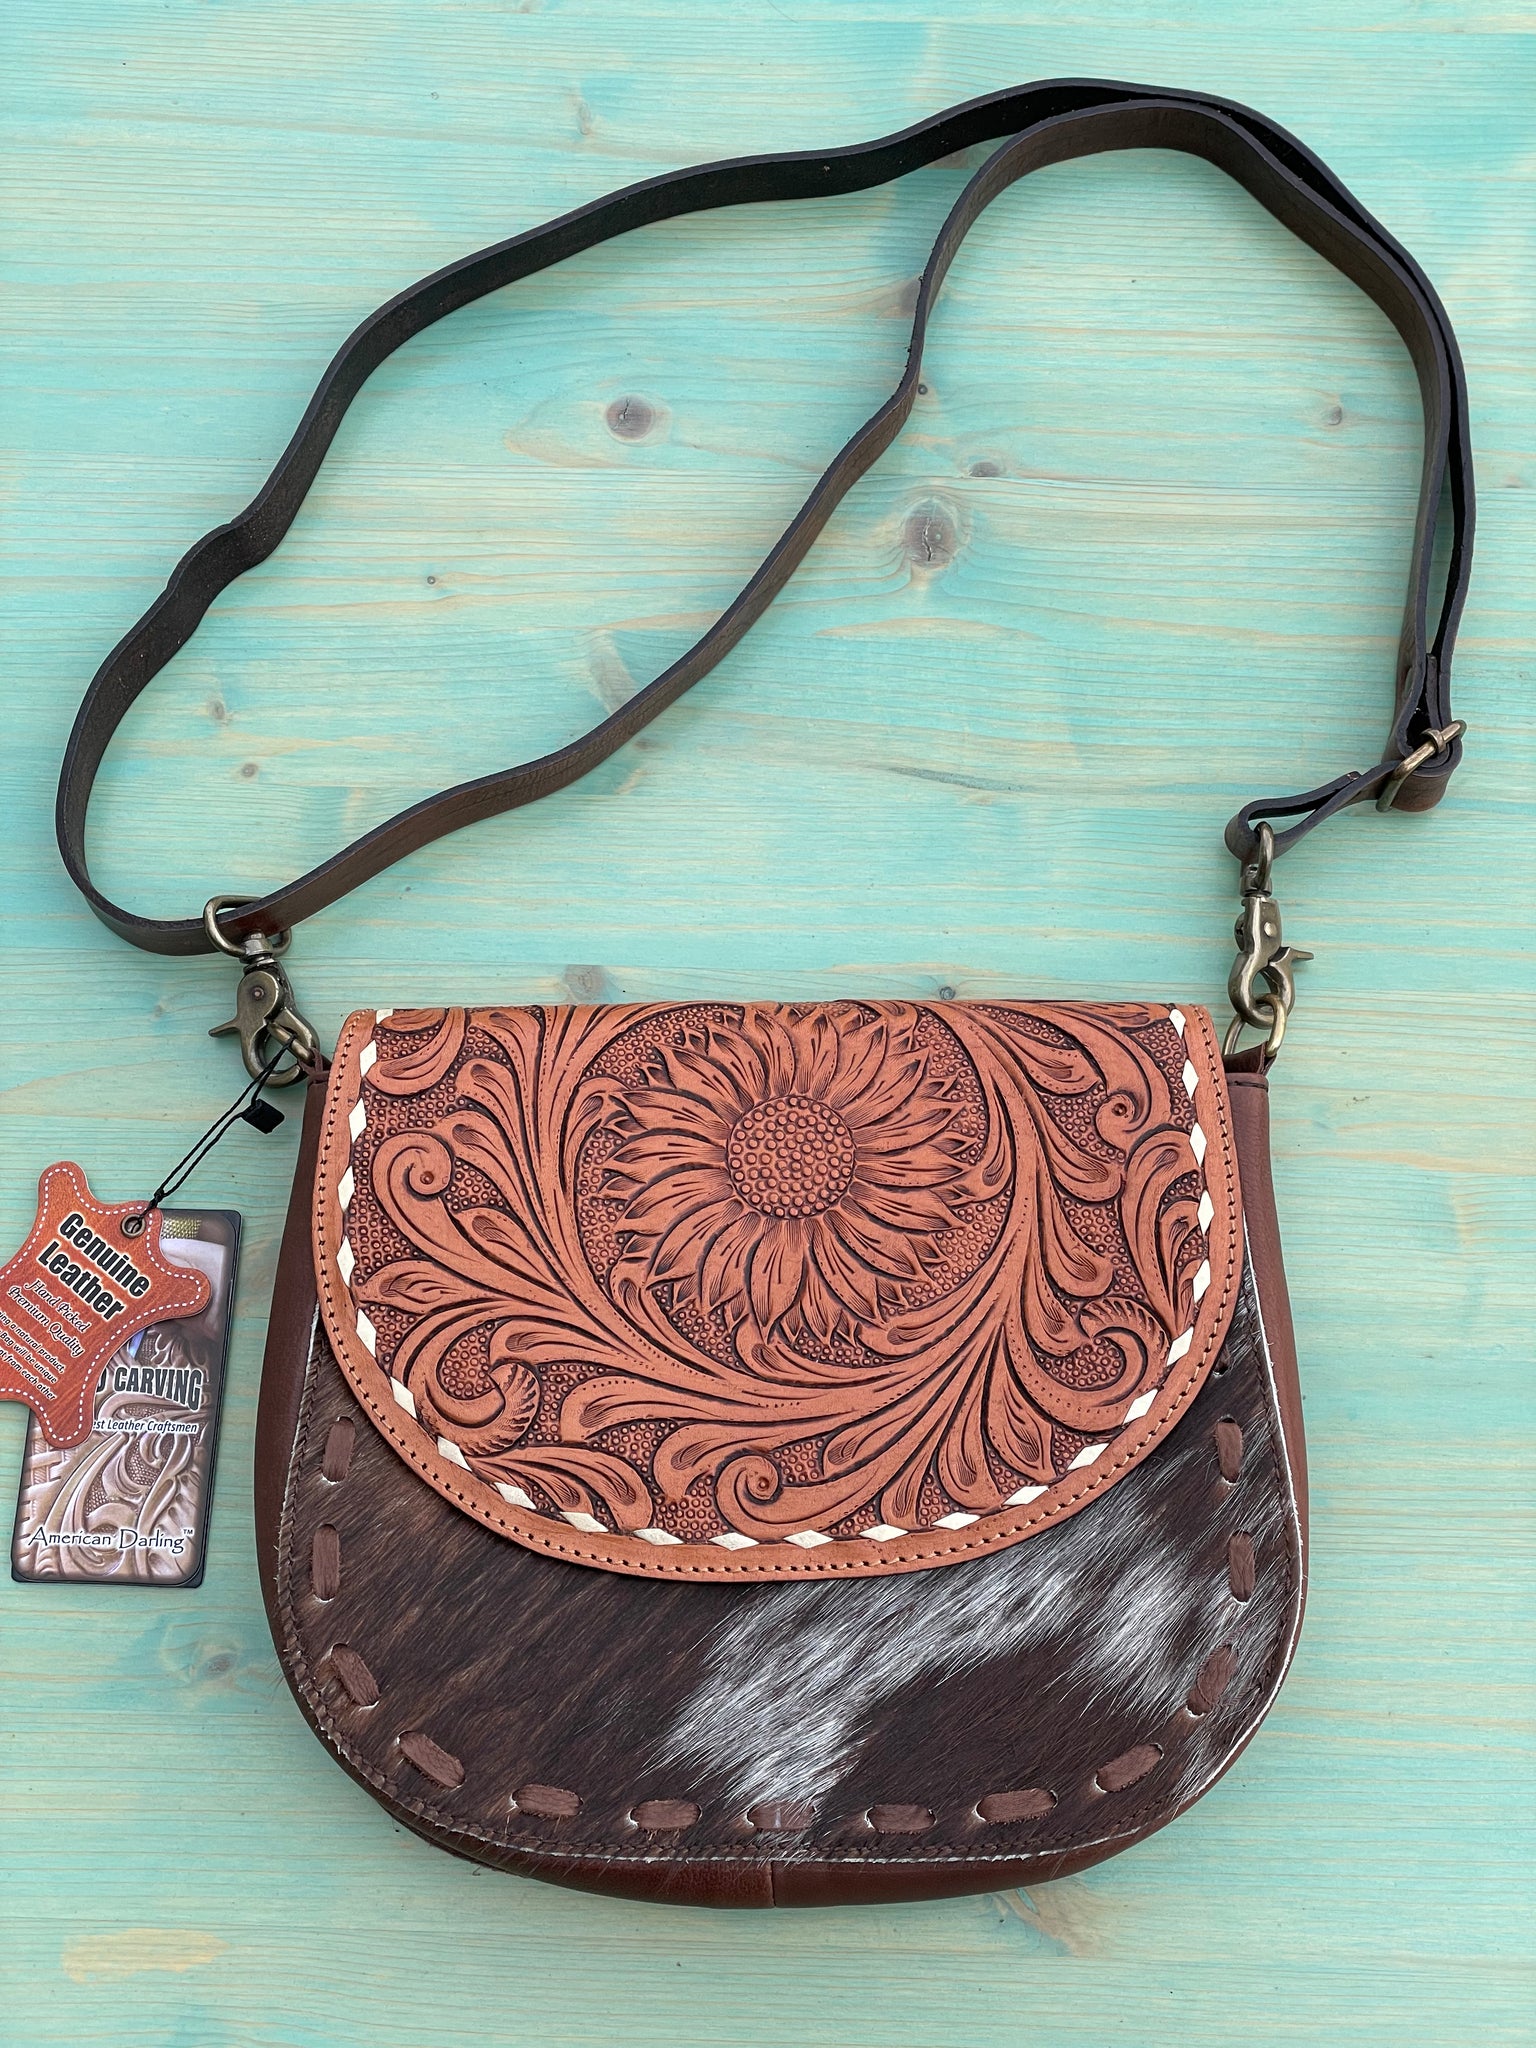 Vintage Tooled Leather Coin Purse